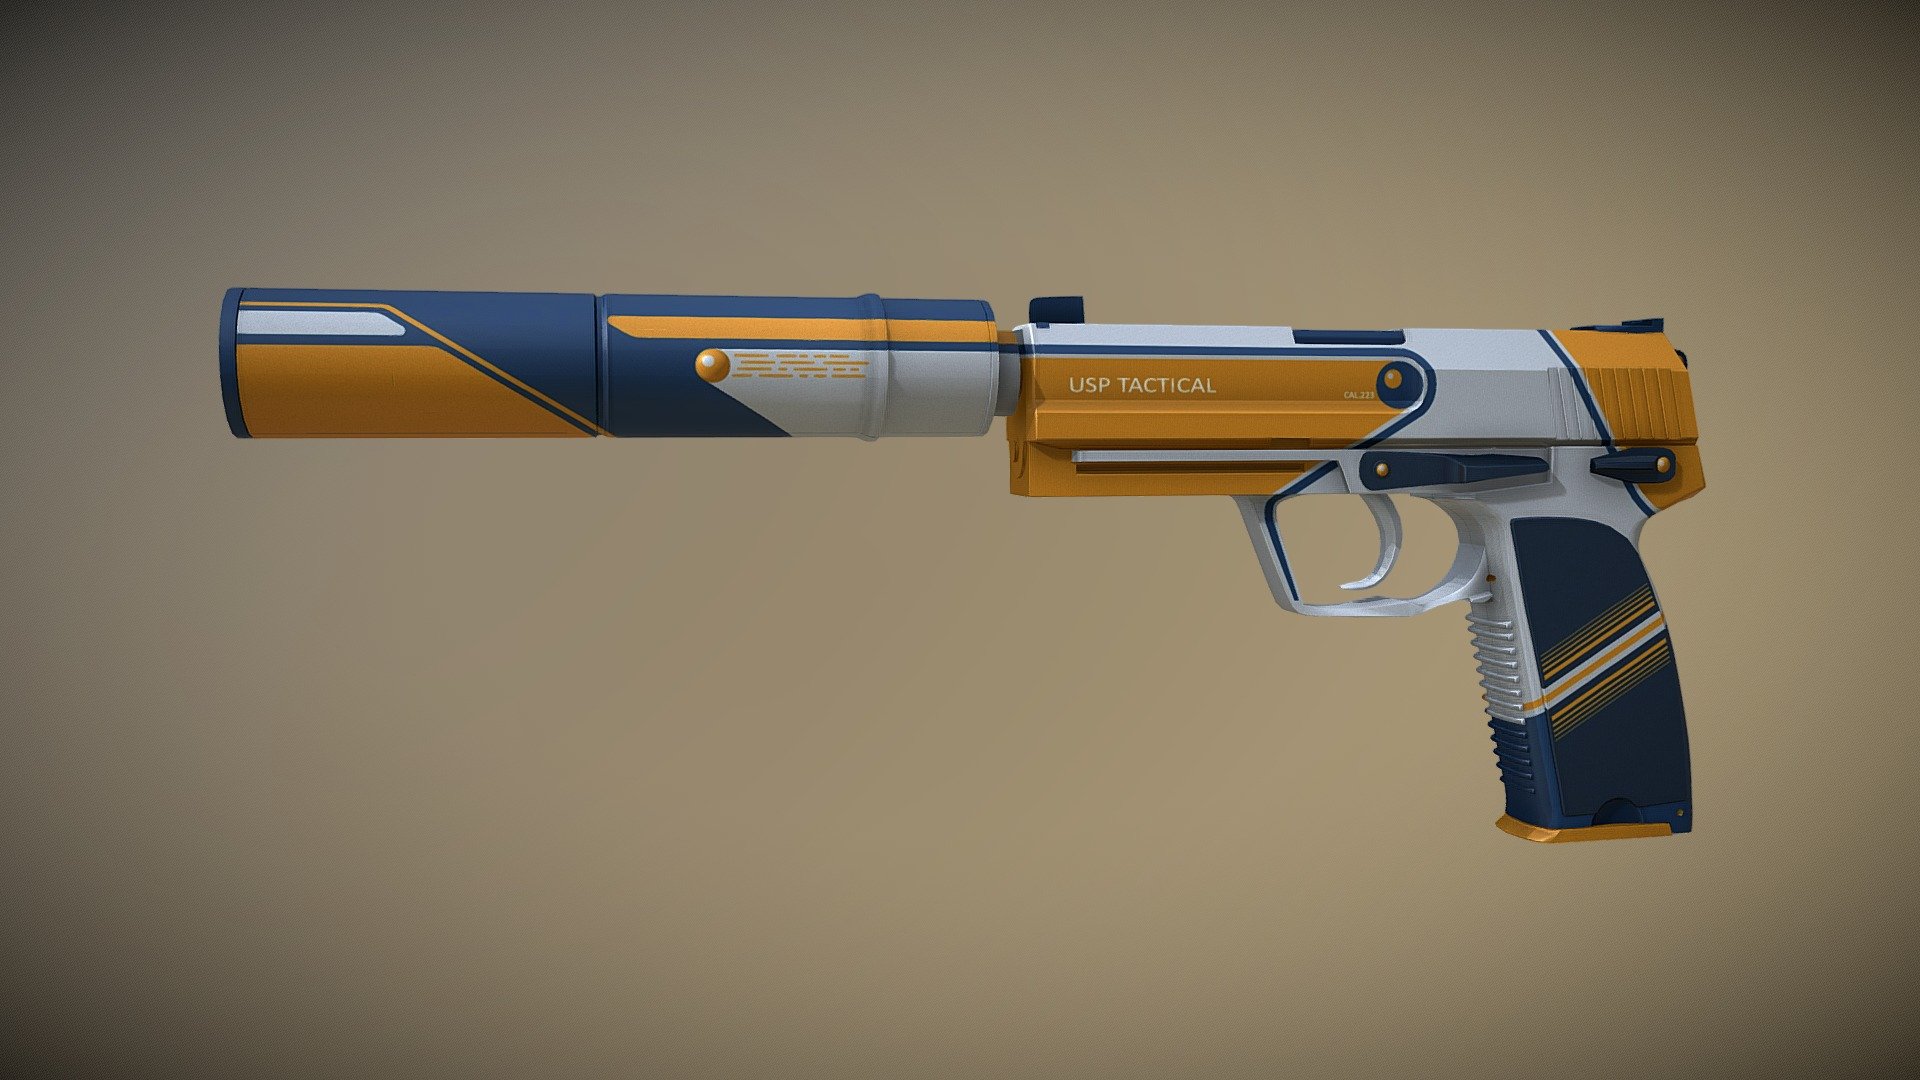 USP-S Airsoft is a skin for CS:GO with a design concept based on airosft markers. Blue and gold colors on top of the white base were inspired by Ford GT MkII track-only verison of the GT supercar. Design of the skin is shaped by two airsoft BB's, one on the body of the weapon and one on the scilencer, which strech the color of the weapon with their momentum 3d model